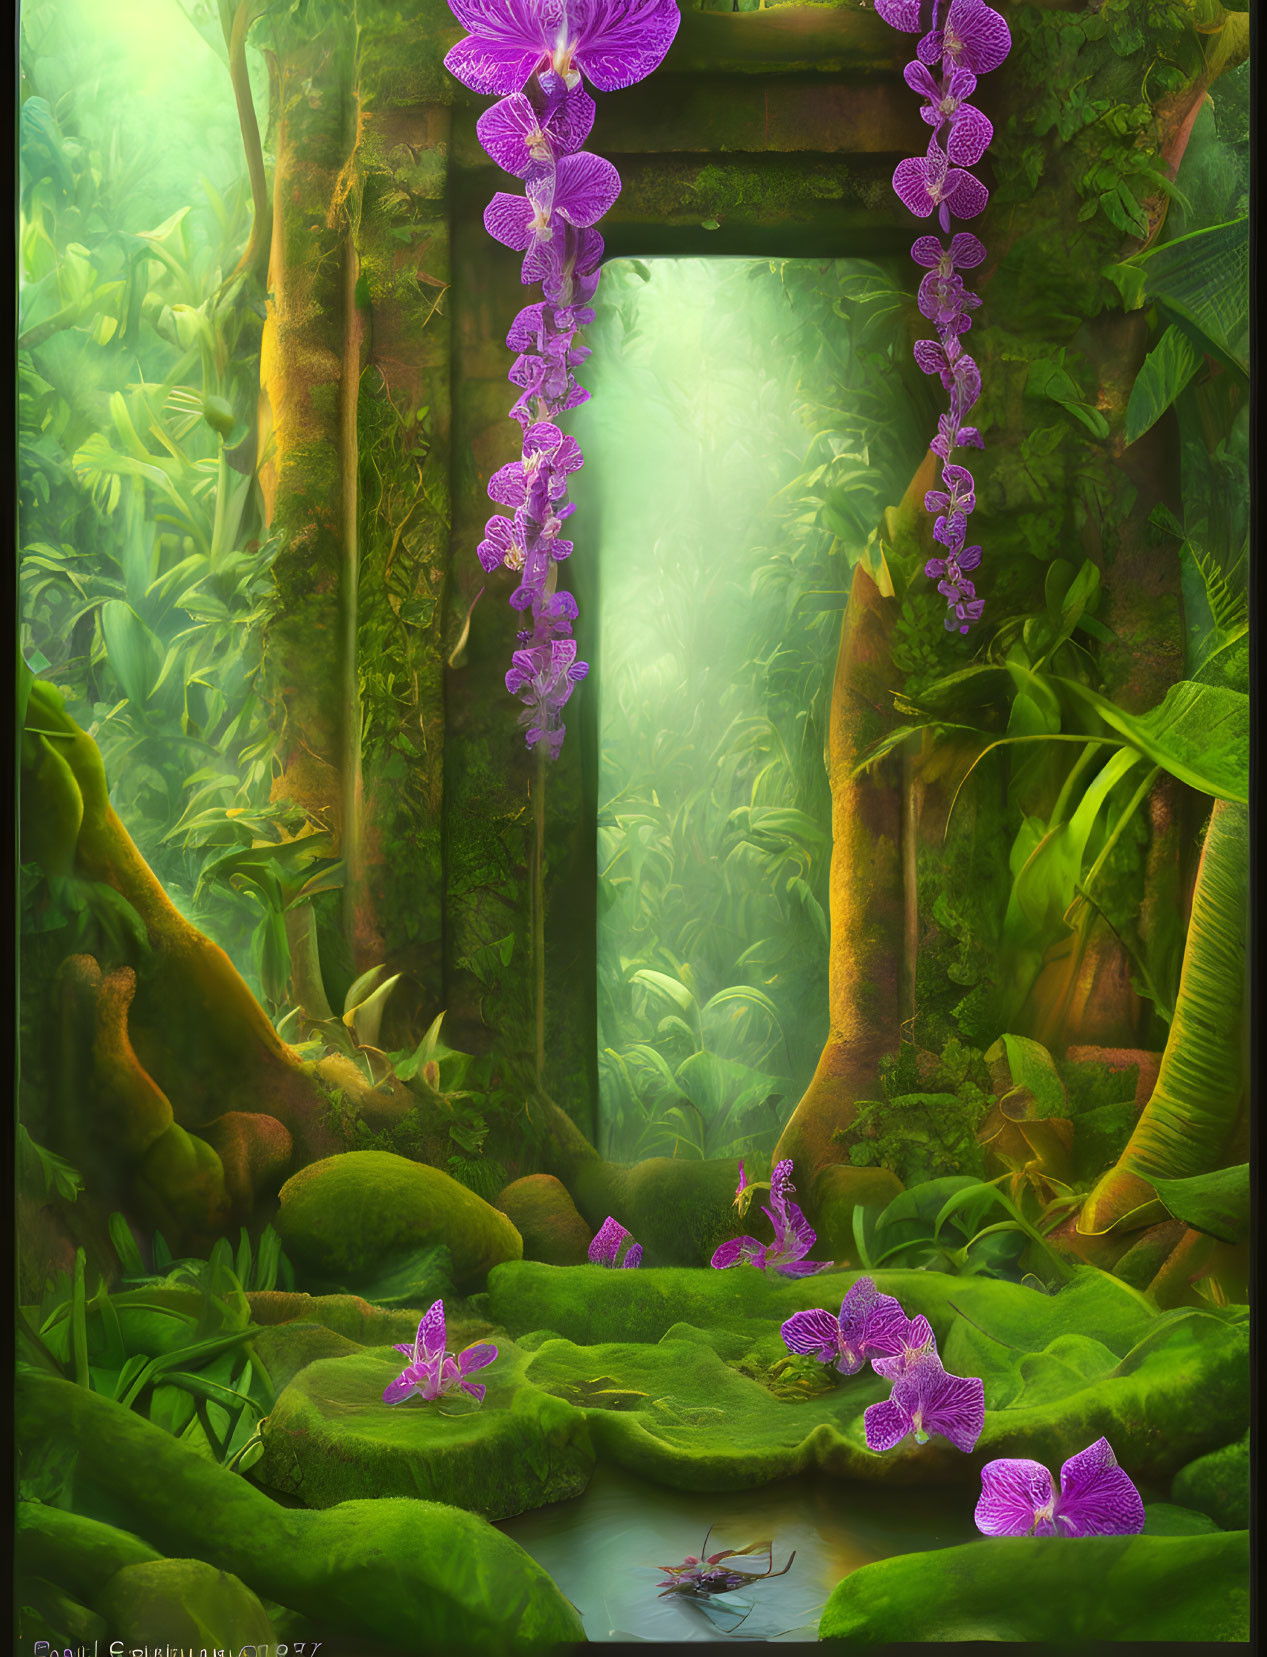 Mystical forest scene with vibrant purple flowers and tranquil pond